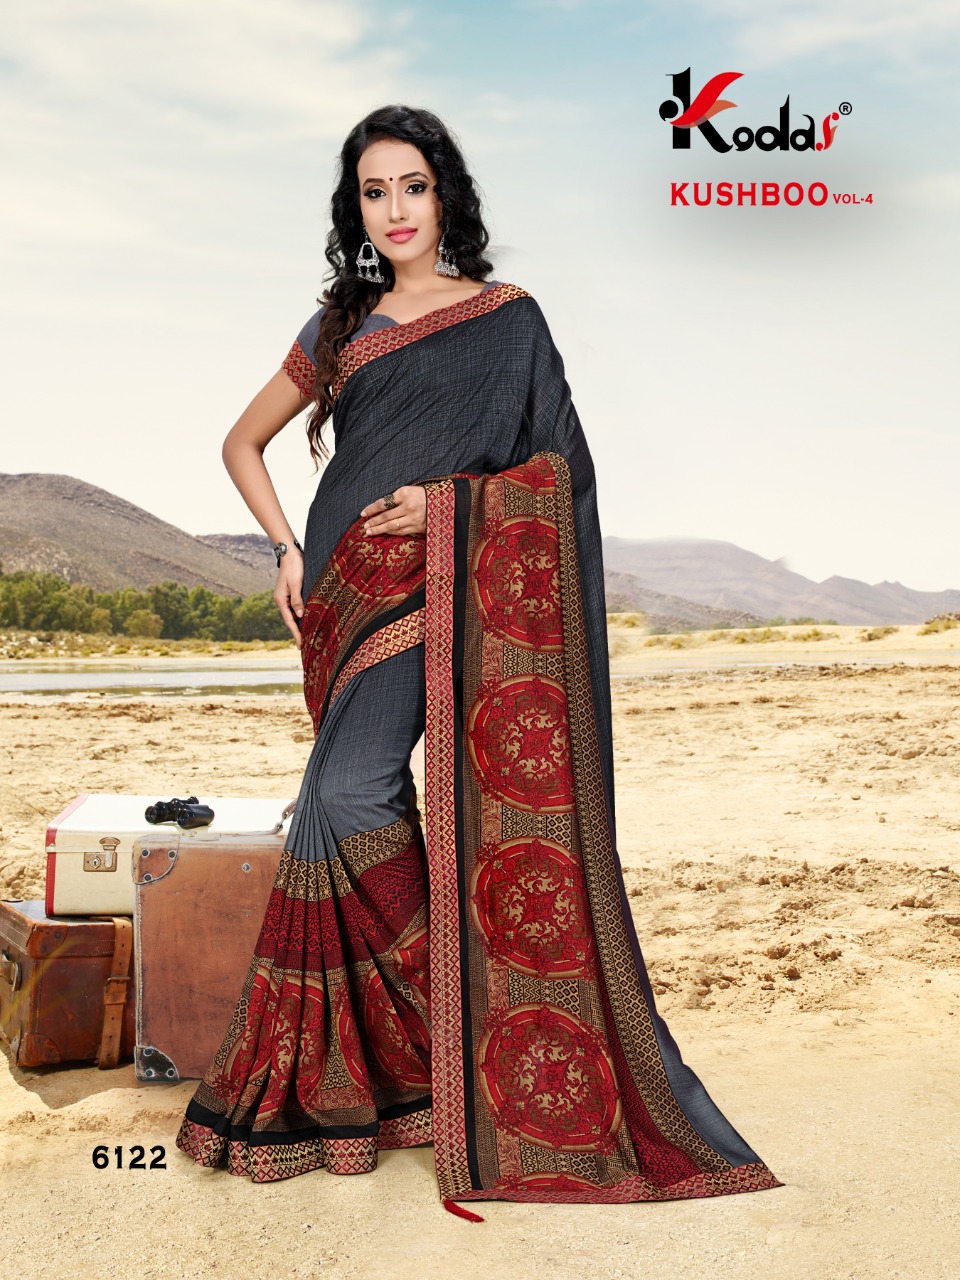 Kushboo Vol 4 By Sitka Vichitra Fancy Printed Saree At Lowest Price In Gujarat